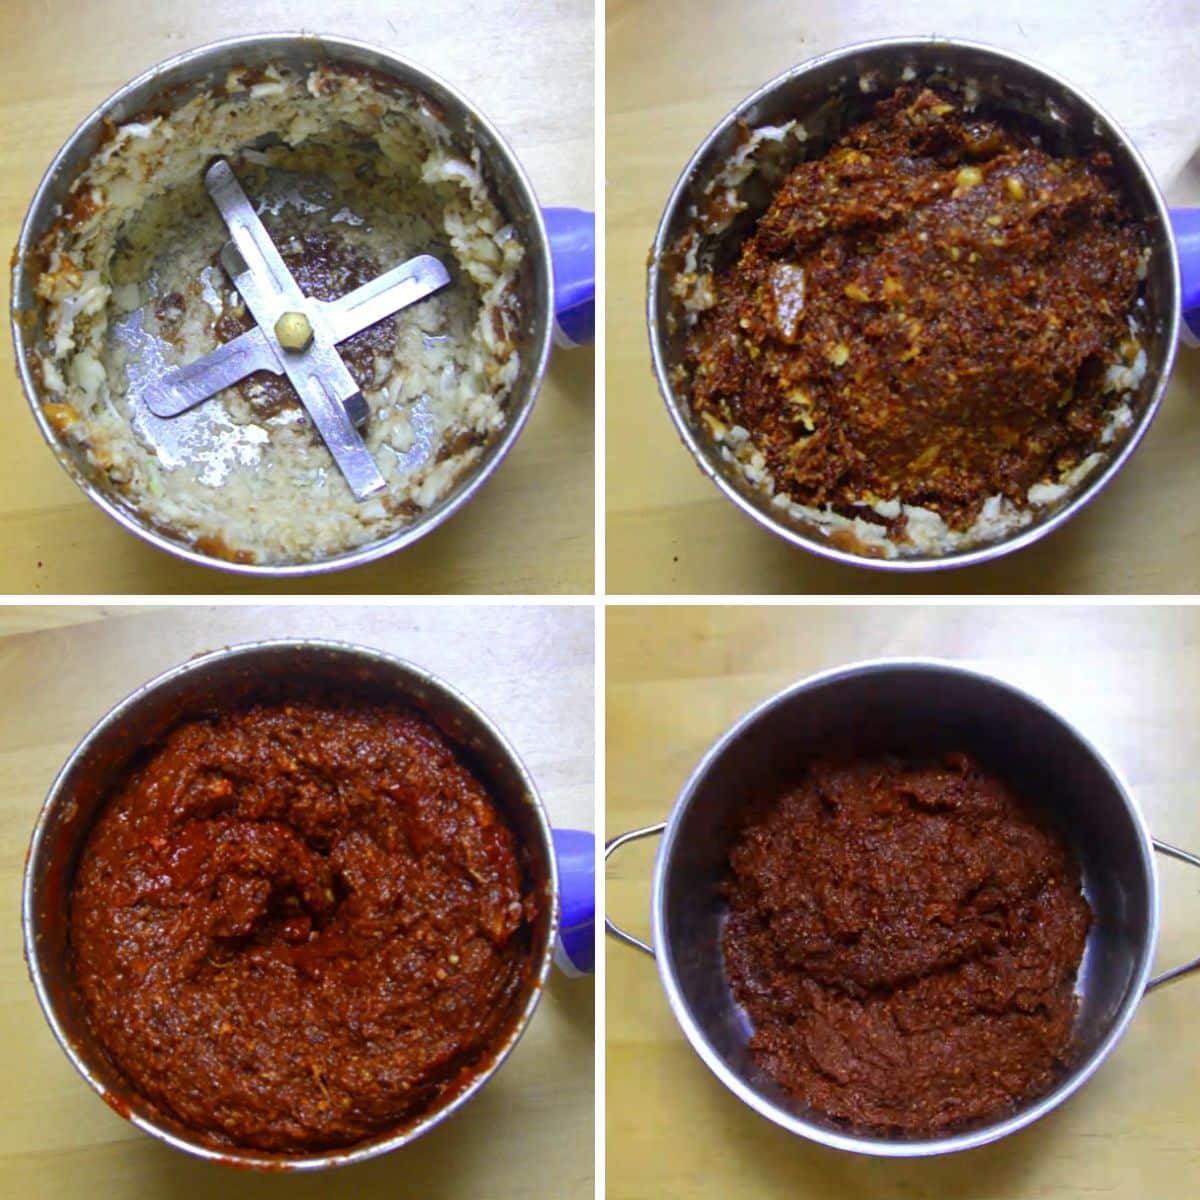 collage of 4 images with top left image of mixie jar with crushed garlic, top right image of red chutney in a mixie jar, bottom left image of red ginger chutney in a mixie jar and bottom right image of mixing fried spices with a red chutney in a steel pot.